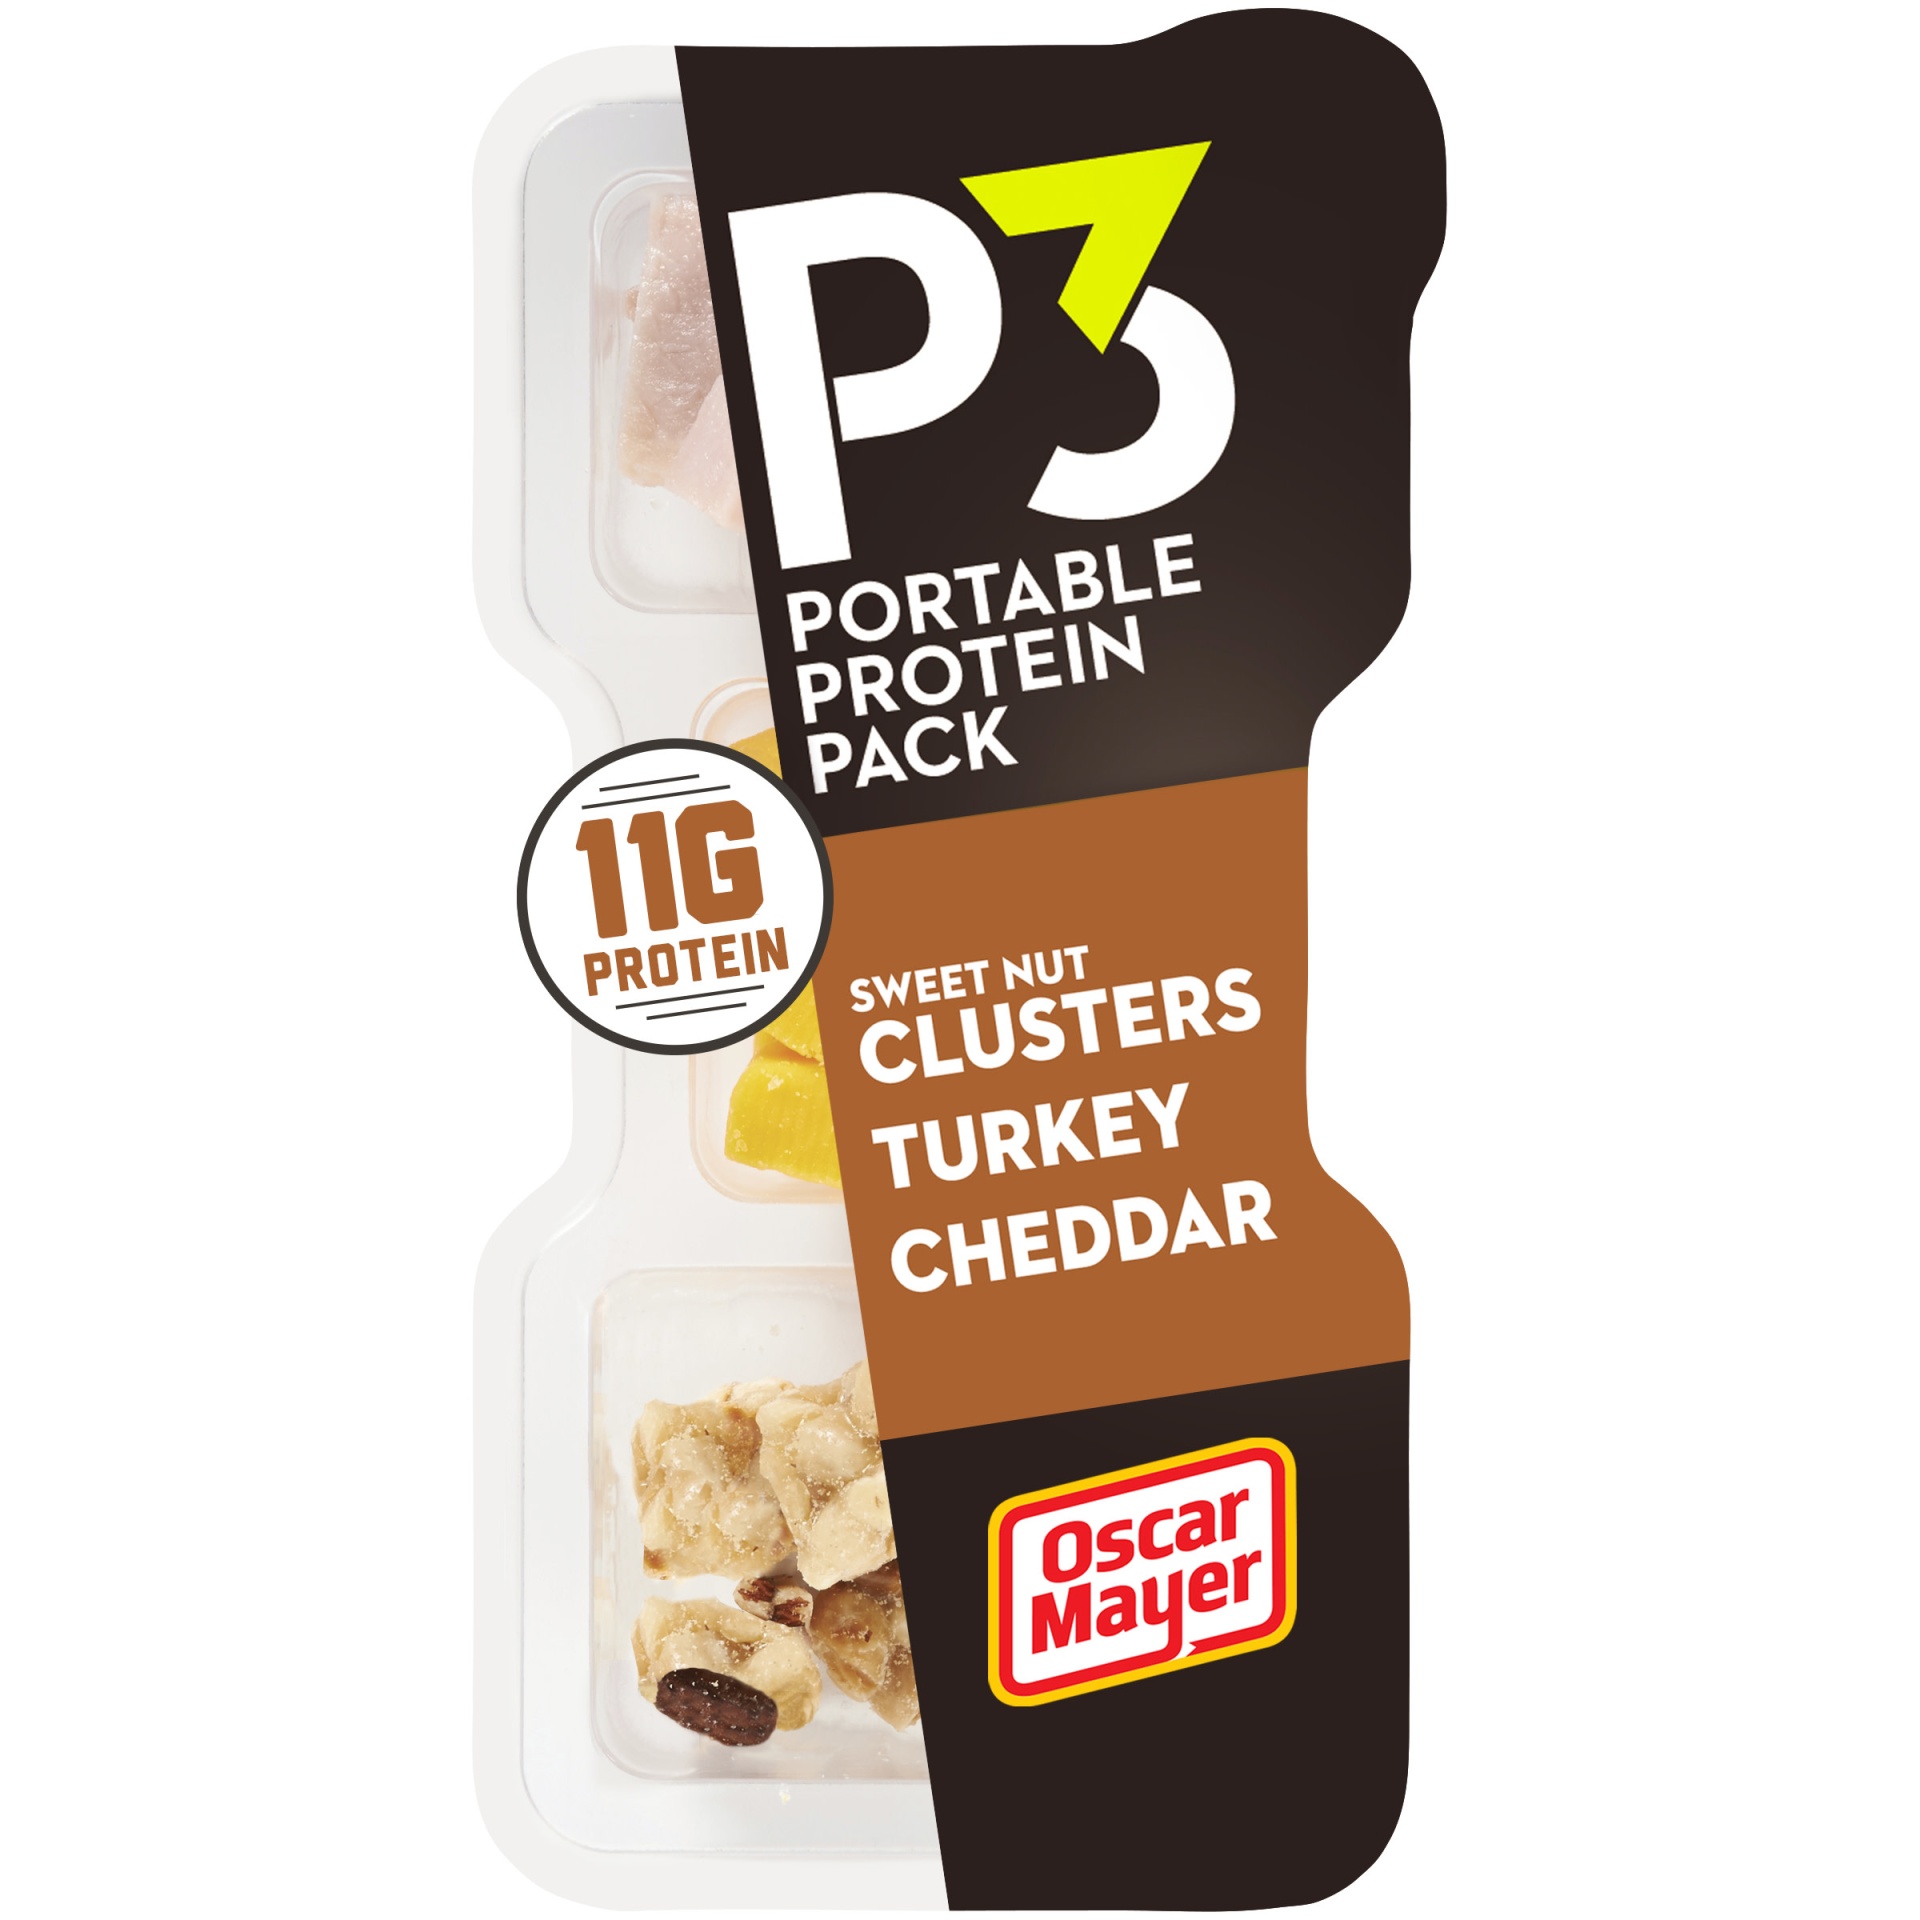 slide 1 of 4, P3 Portable Protein Snack Pack with Sweet Almond Nut Clusters, Turkey & Cheddar Cheese Tray, 2 oz